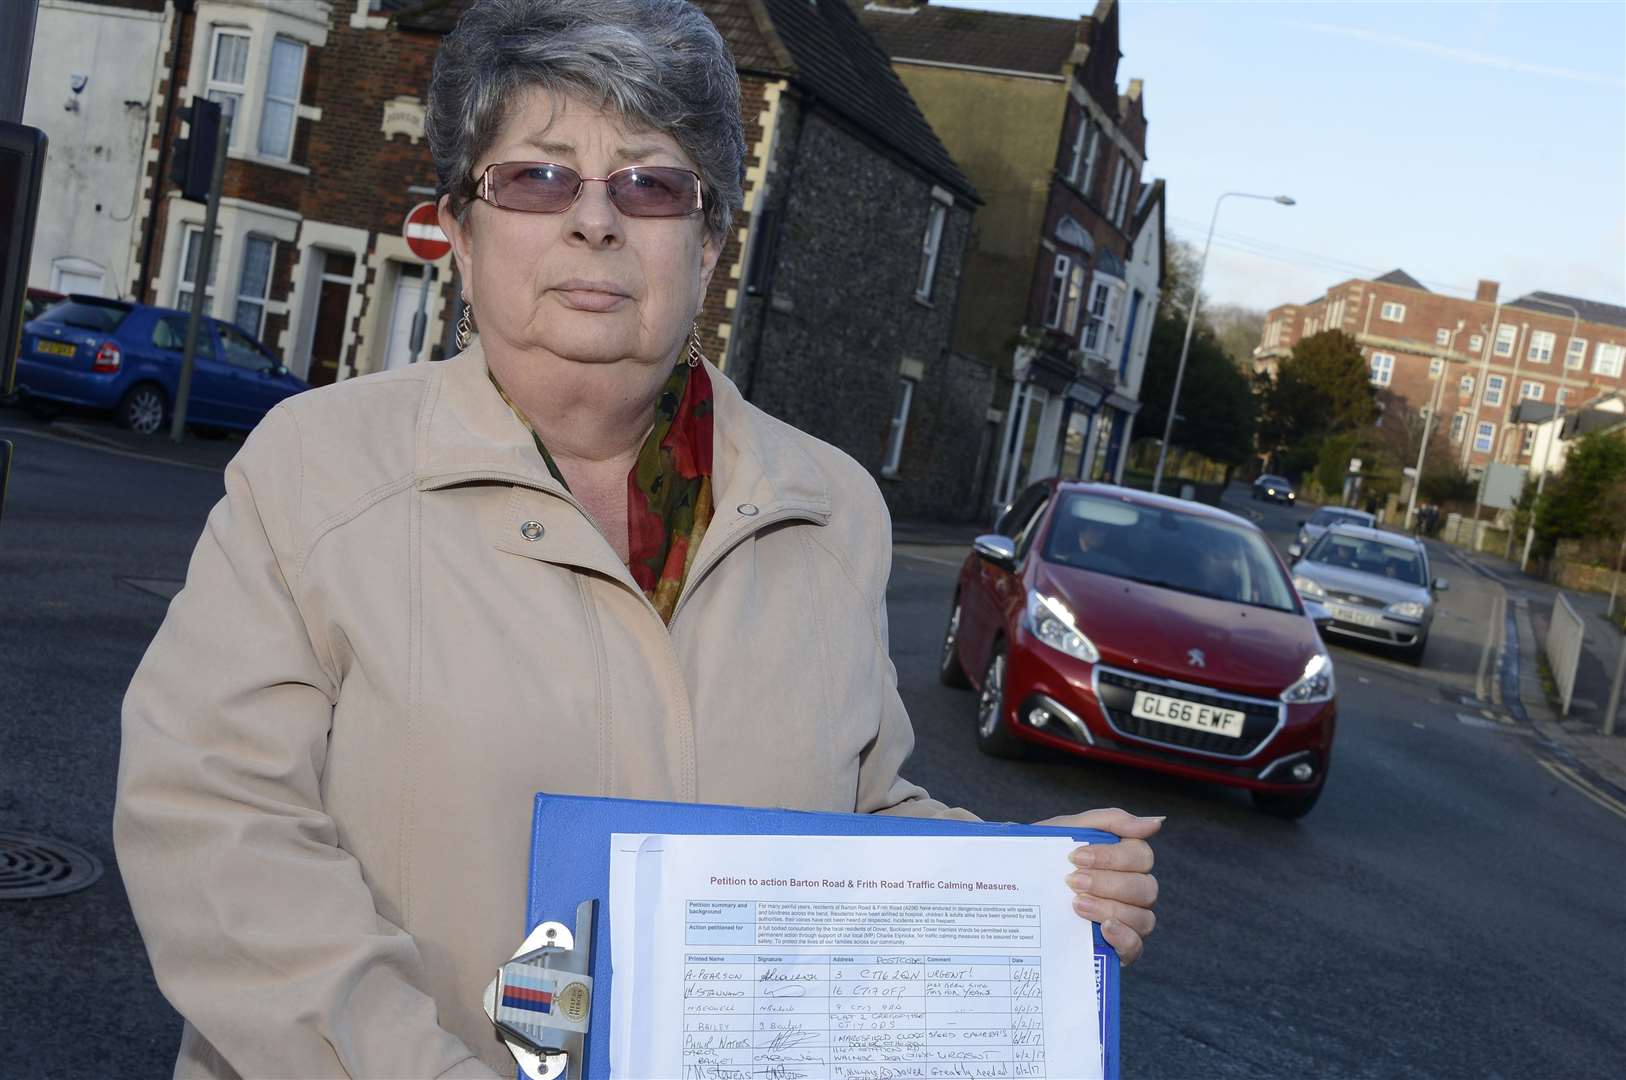 Augusta Pearson at the junction of Frith Road and Maison Dieu Road in 2017 when she warned someone could die.Picture: Paul Amos